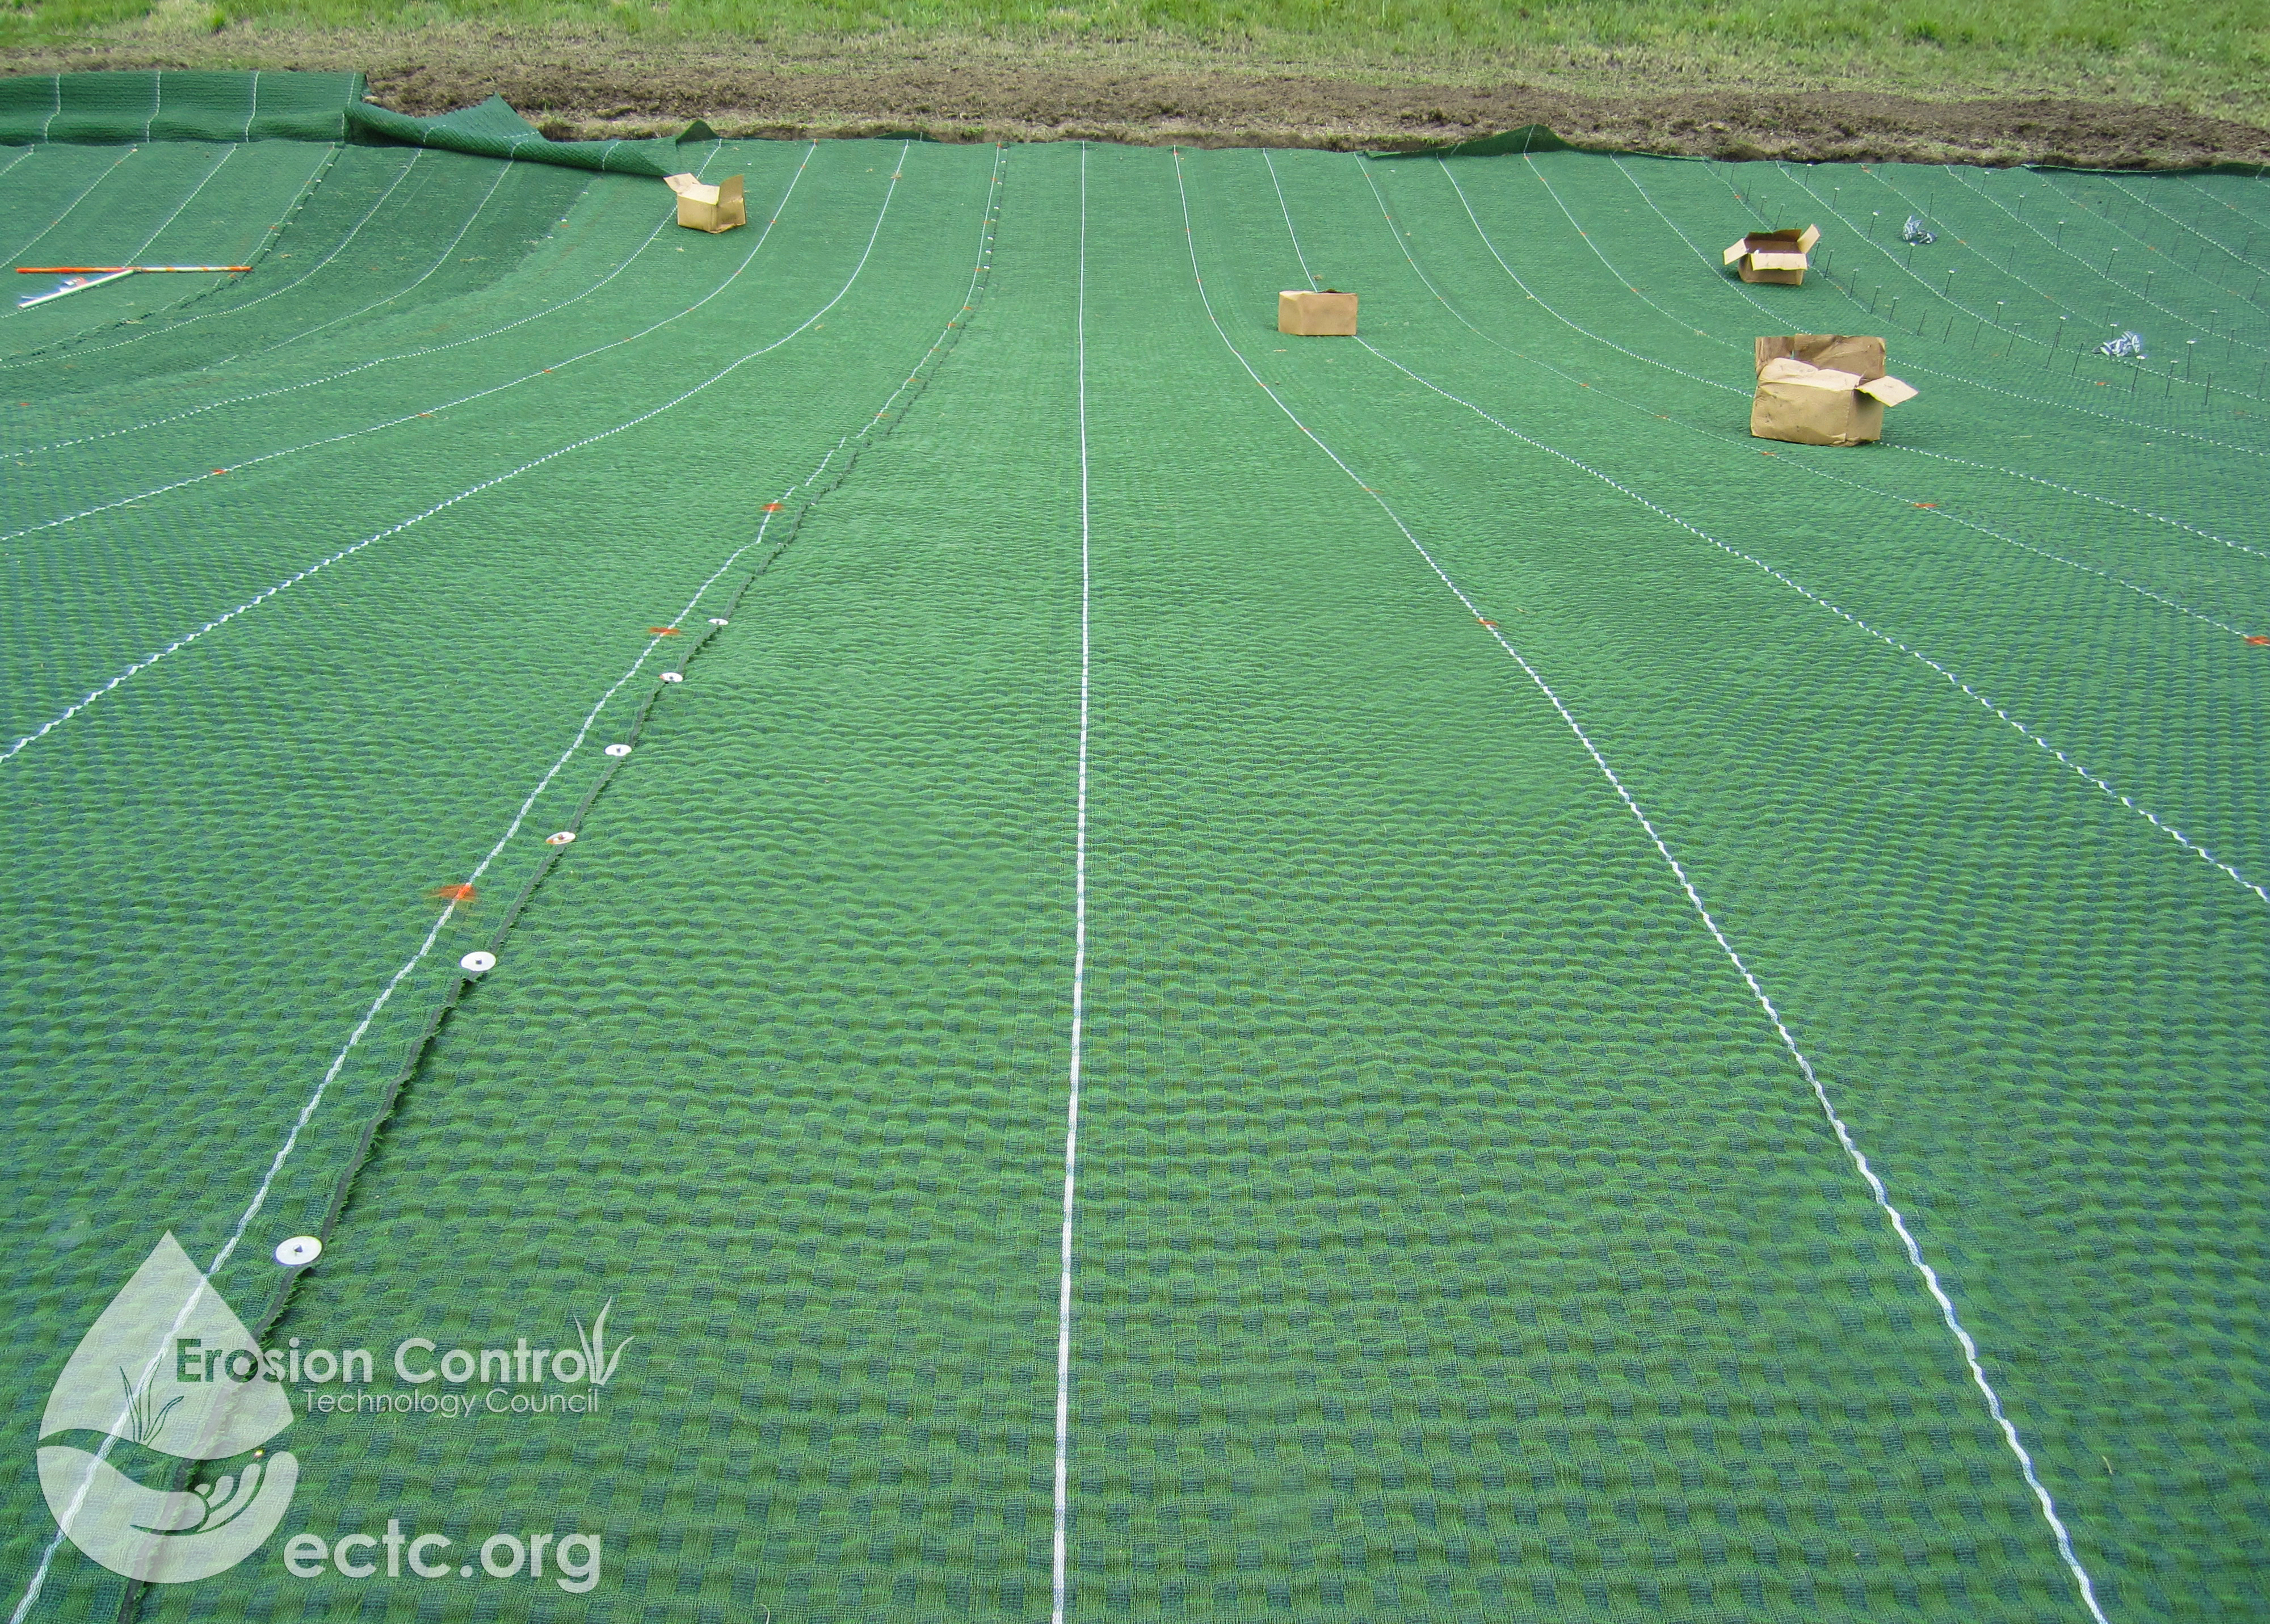 High-Performance Turf Reinforcement Mat Used to Provide long-term slope Stability